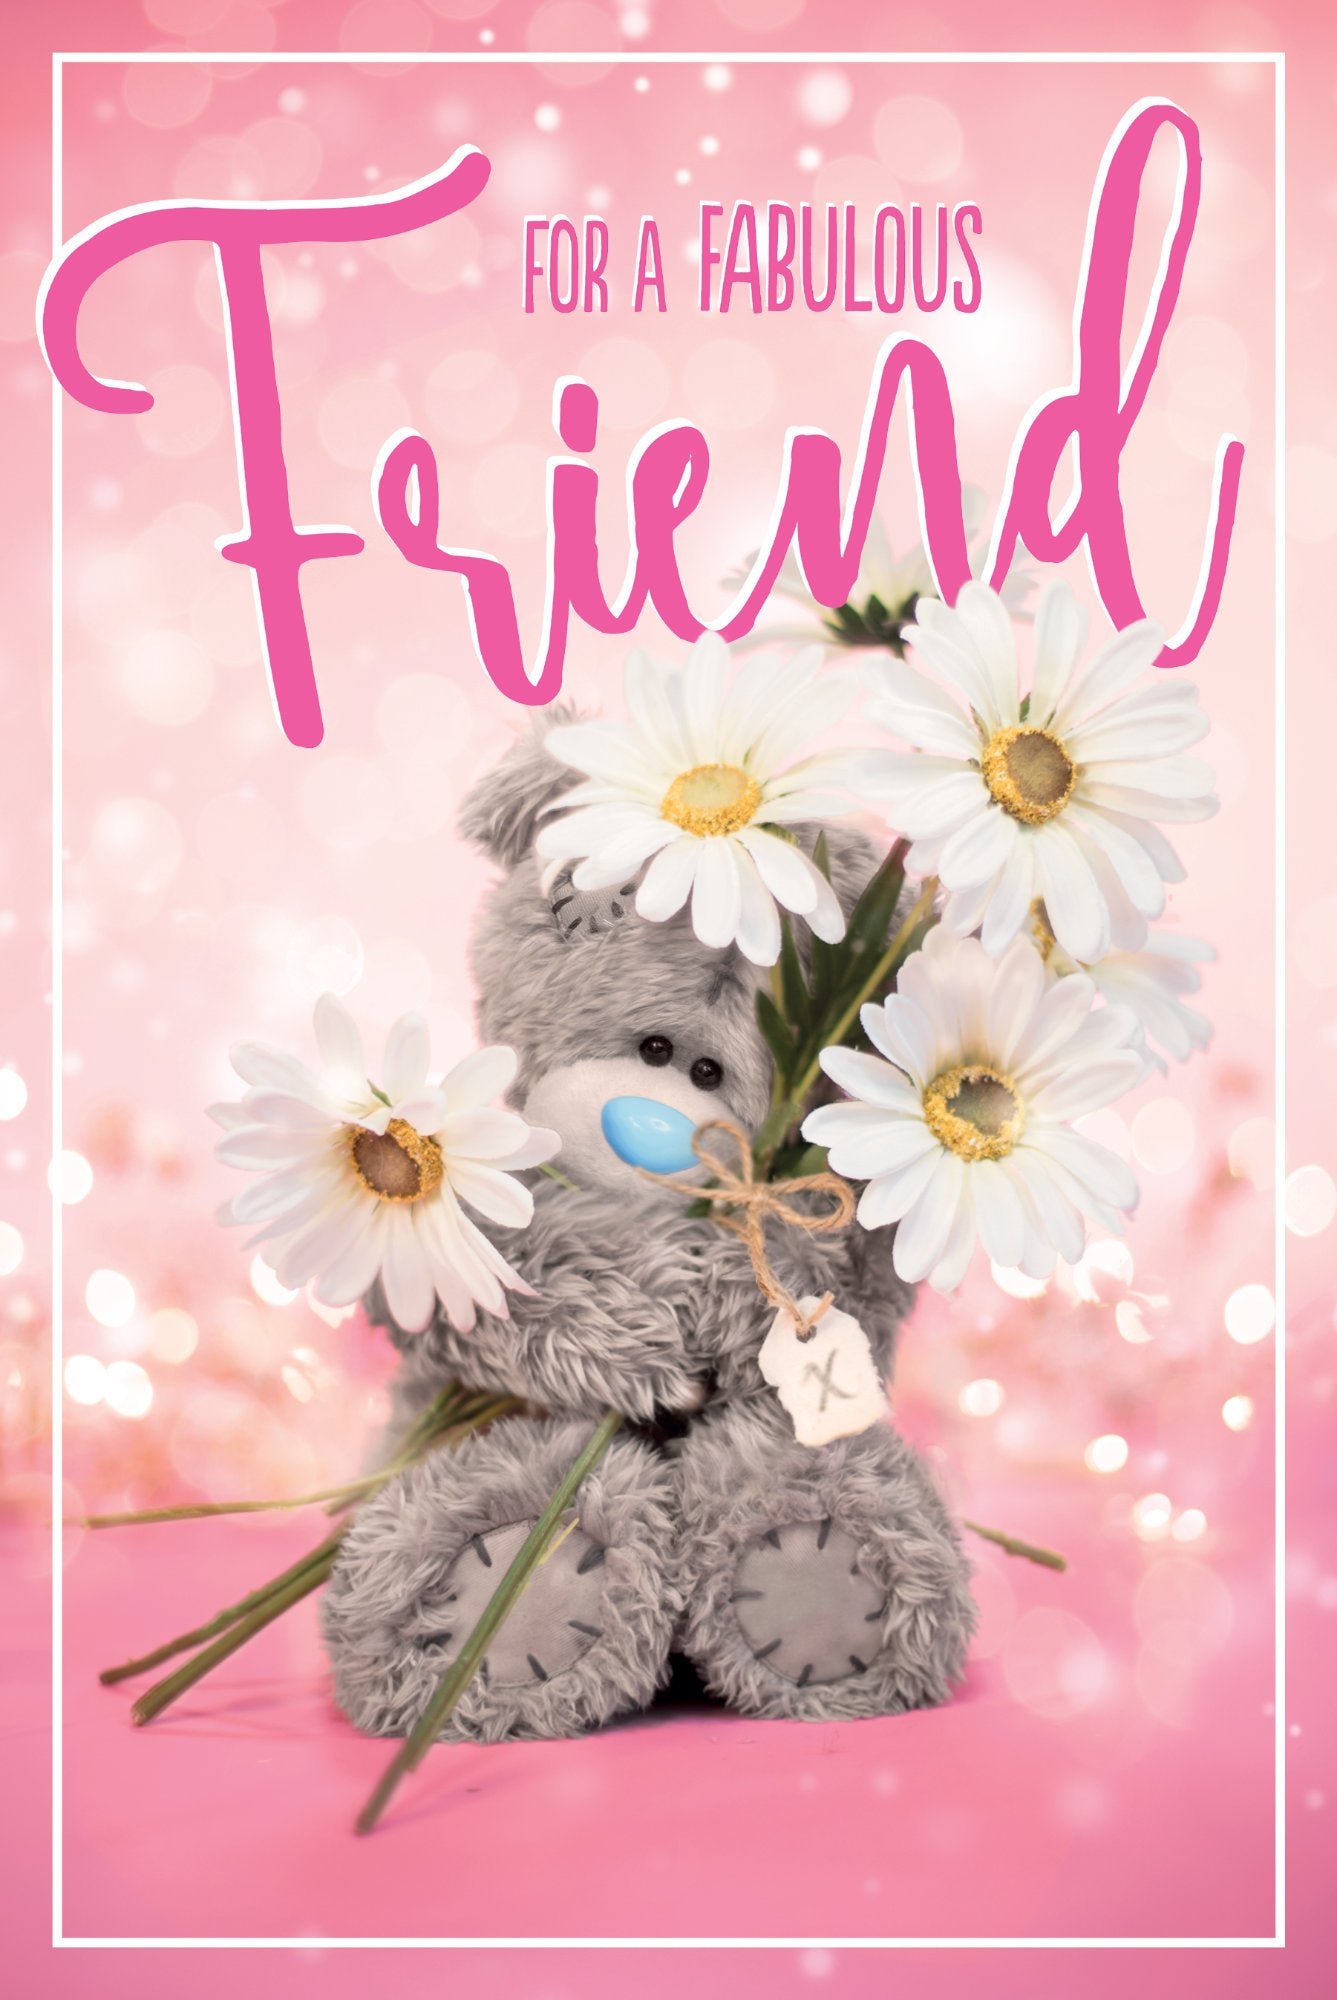 Photograph of Special Friend Birthday Teddy Greetings Card at Nicole's Shop